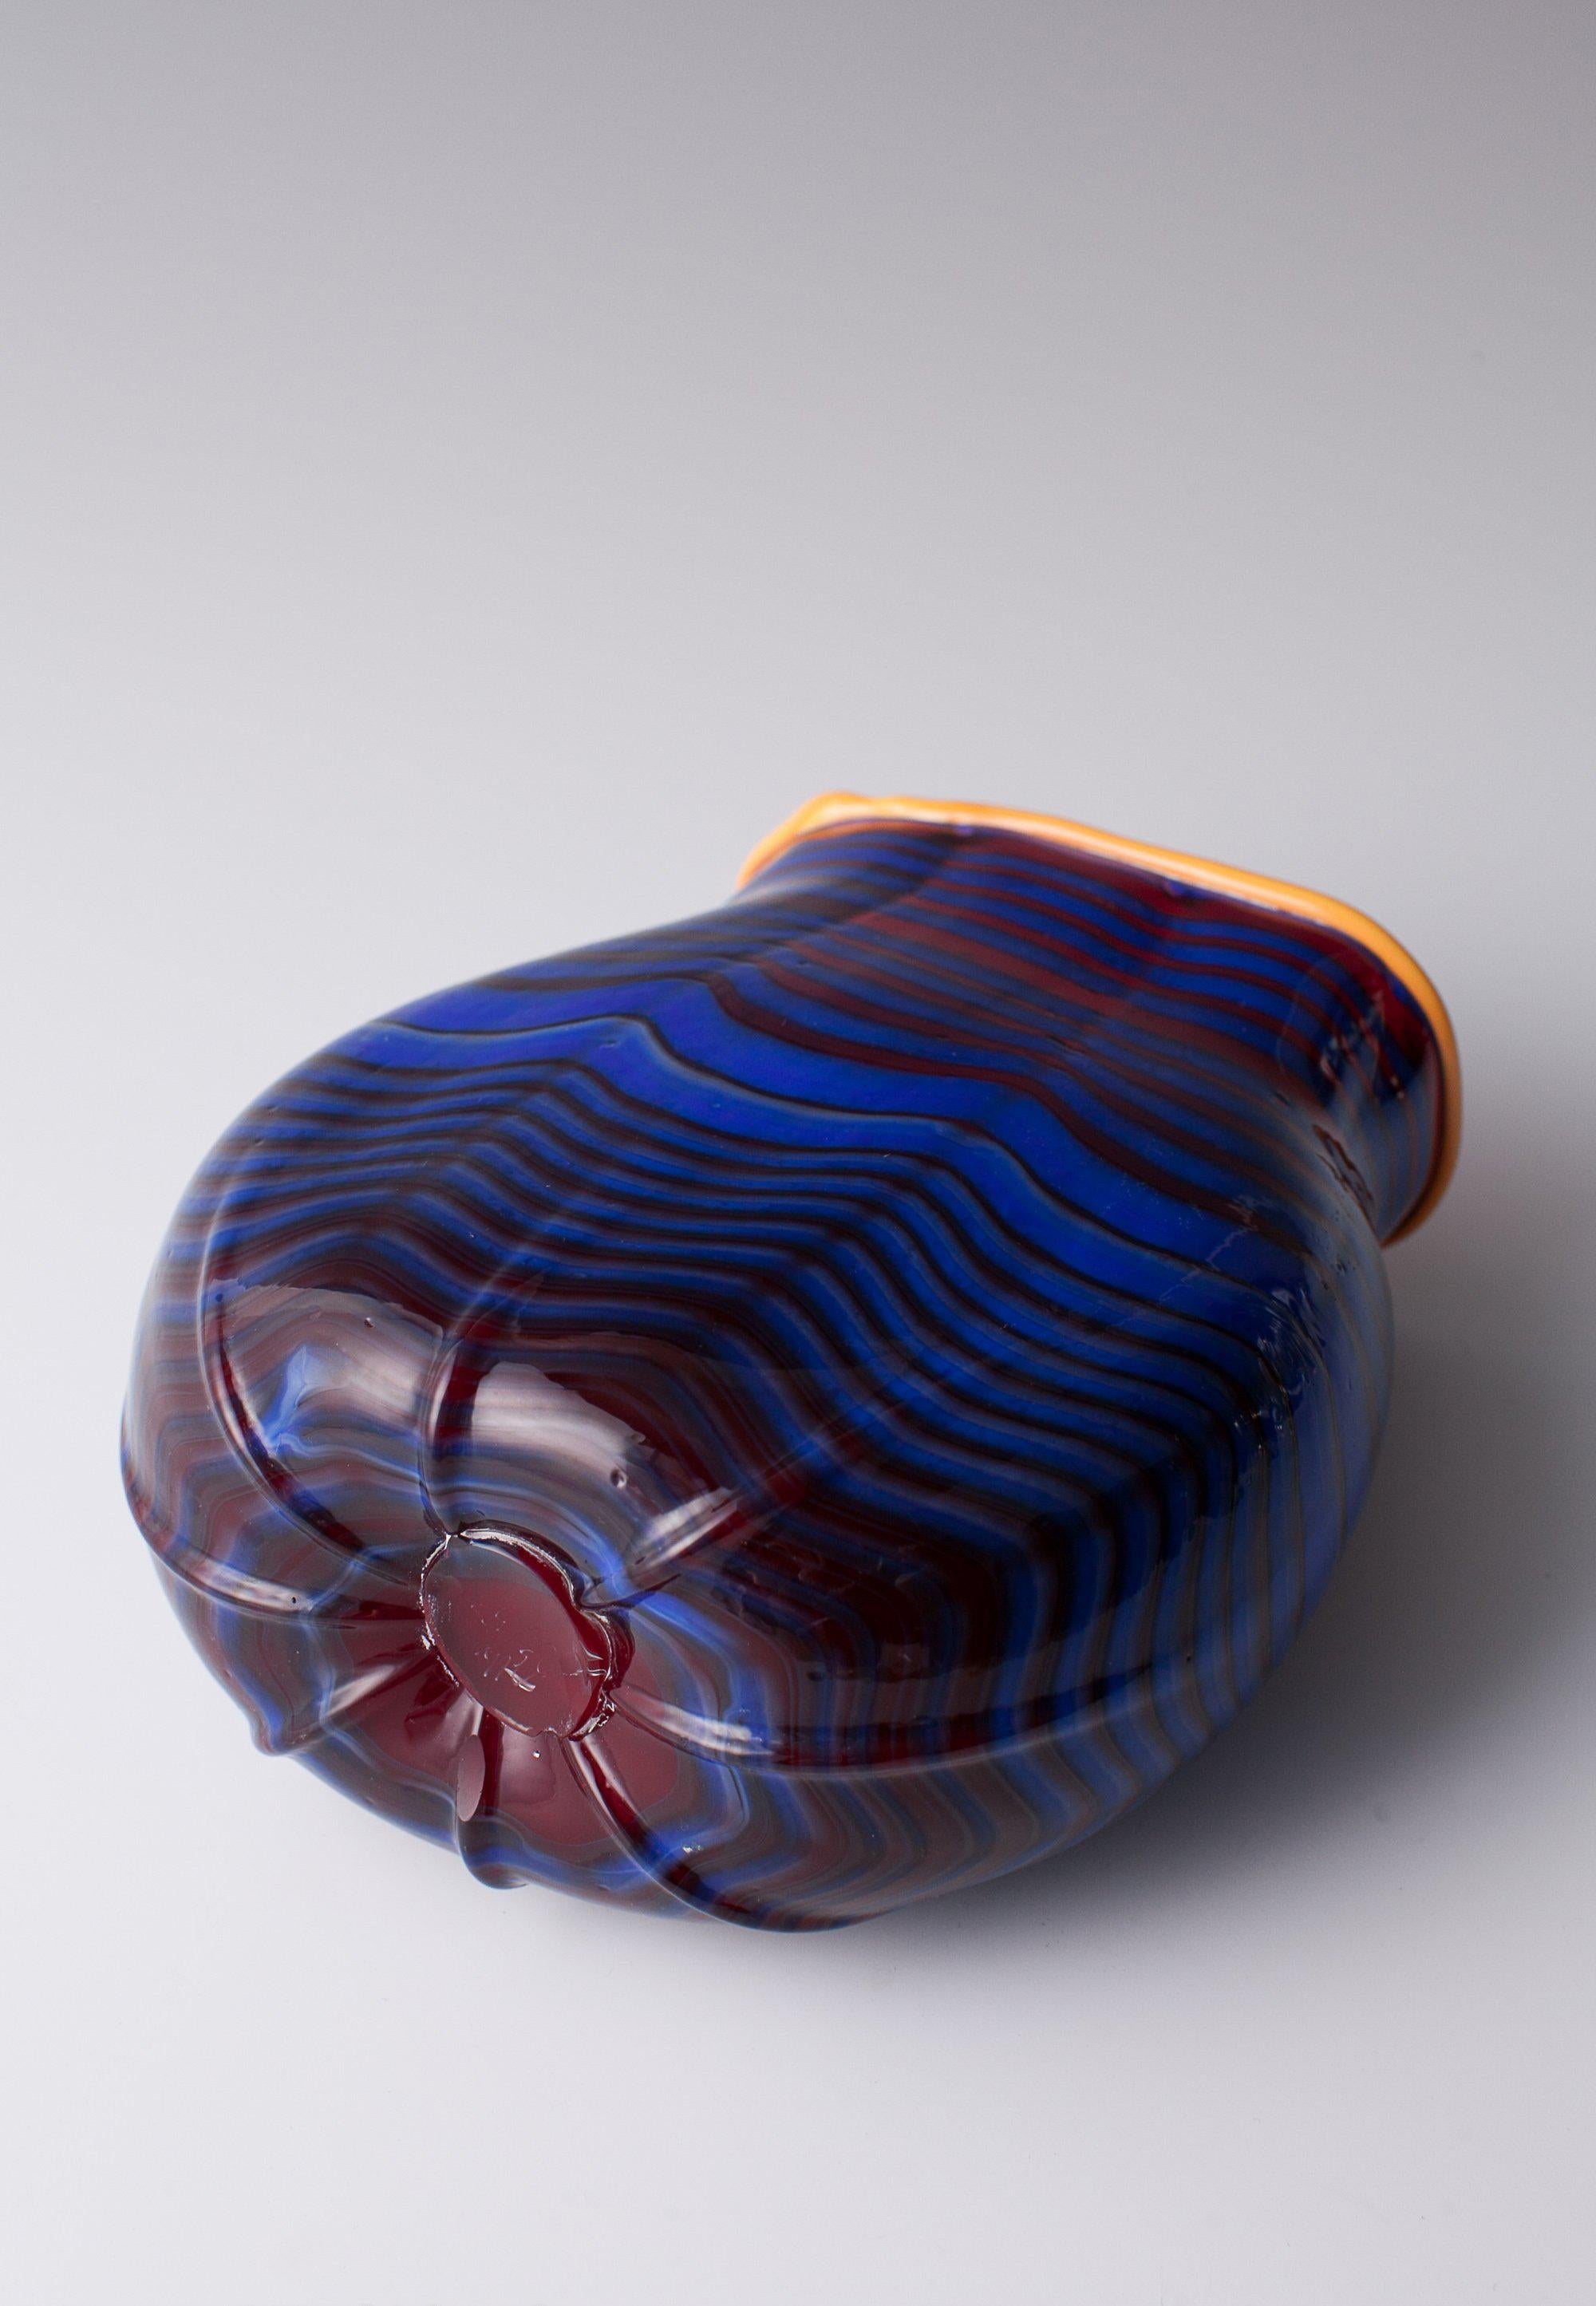 Italian Vase Dale Chihuly, 1993 Toppiece, Unique, Signed